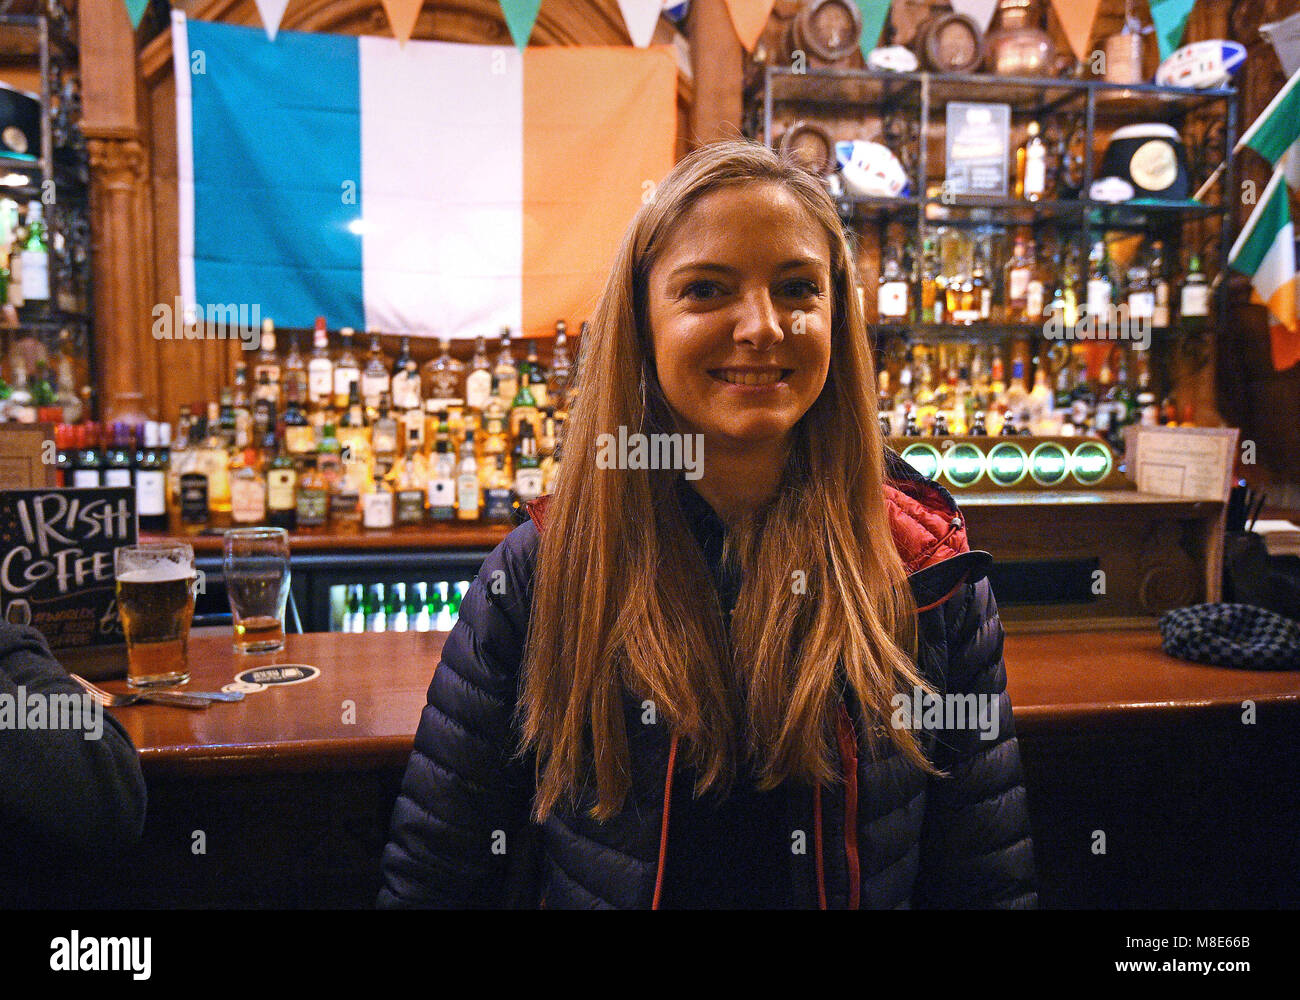 Suzie Crawford in Waxy O'Connor's in Leicester Square, London ahead of tomorrow's Six Nations match against England at Twickenham. Stock Photo